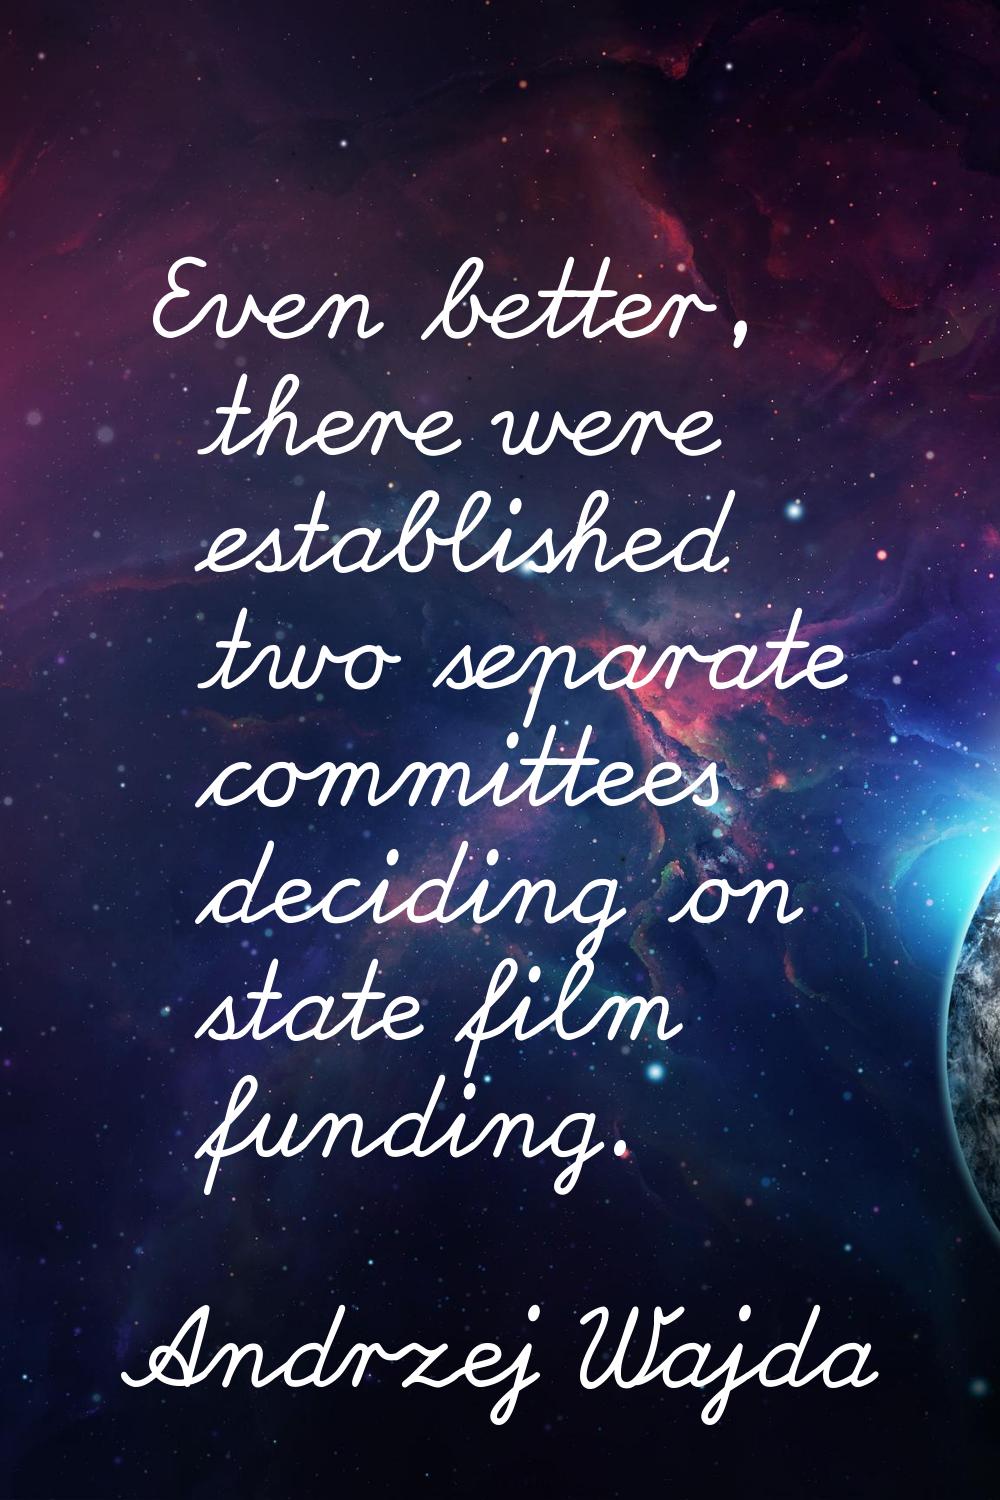 Even better, there were established two separate committees deciding on state film funding.